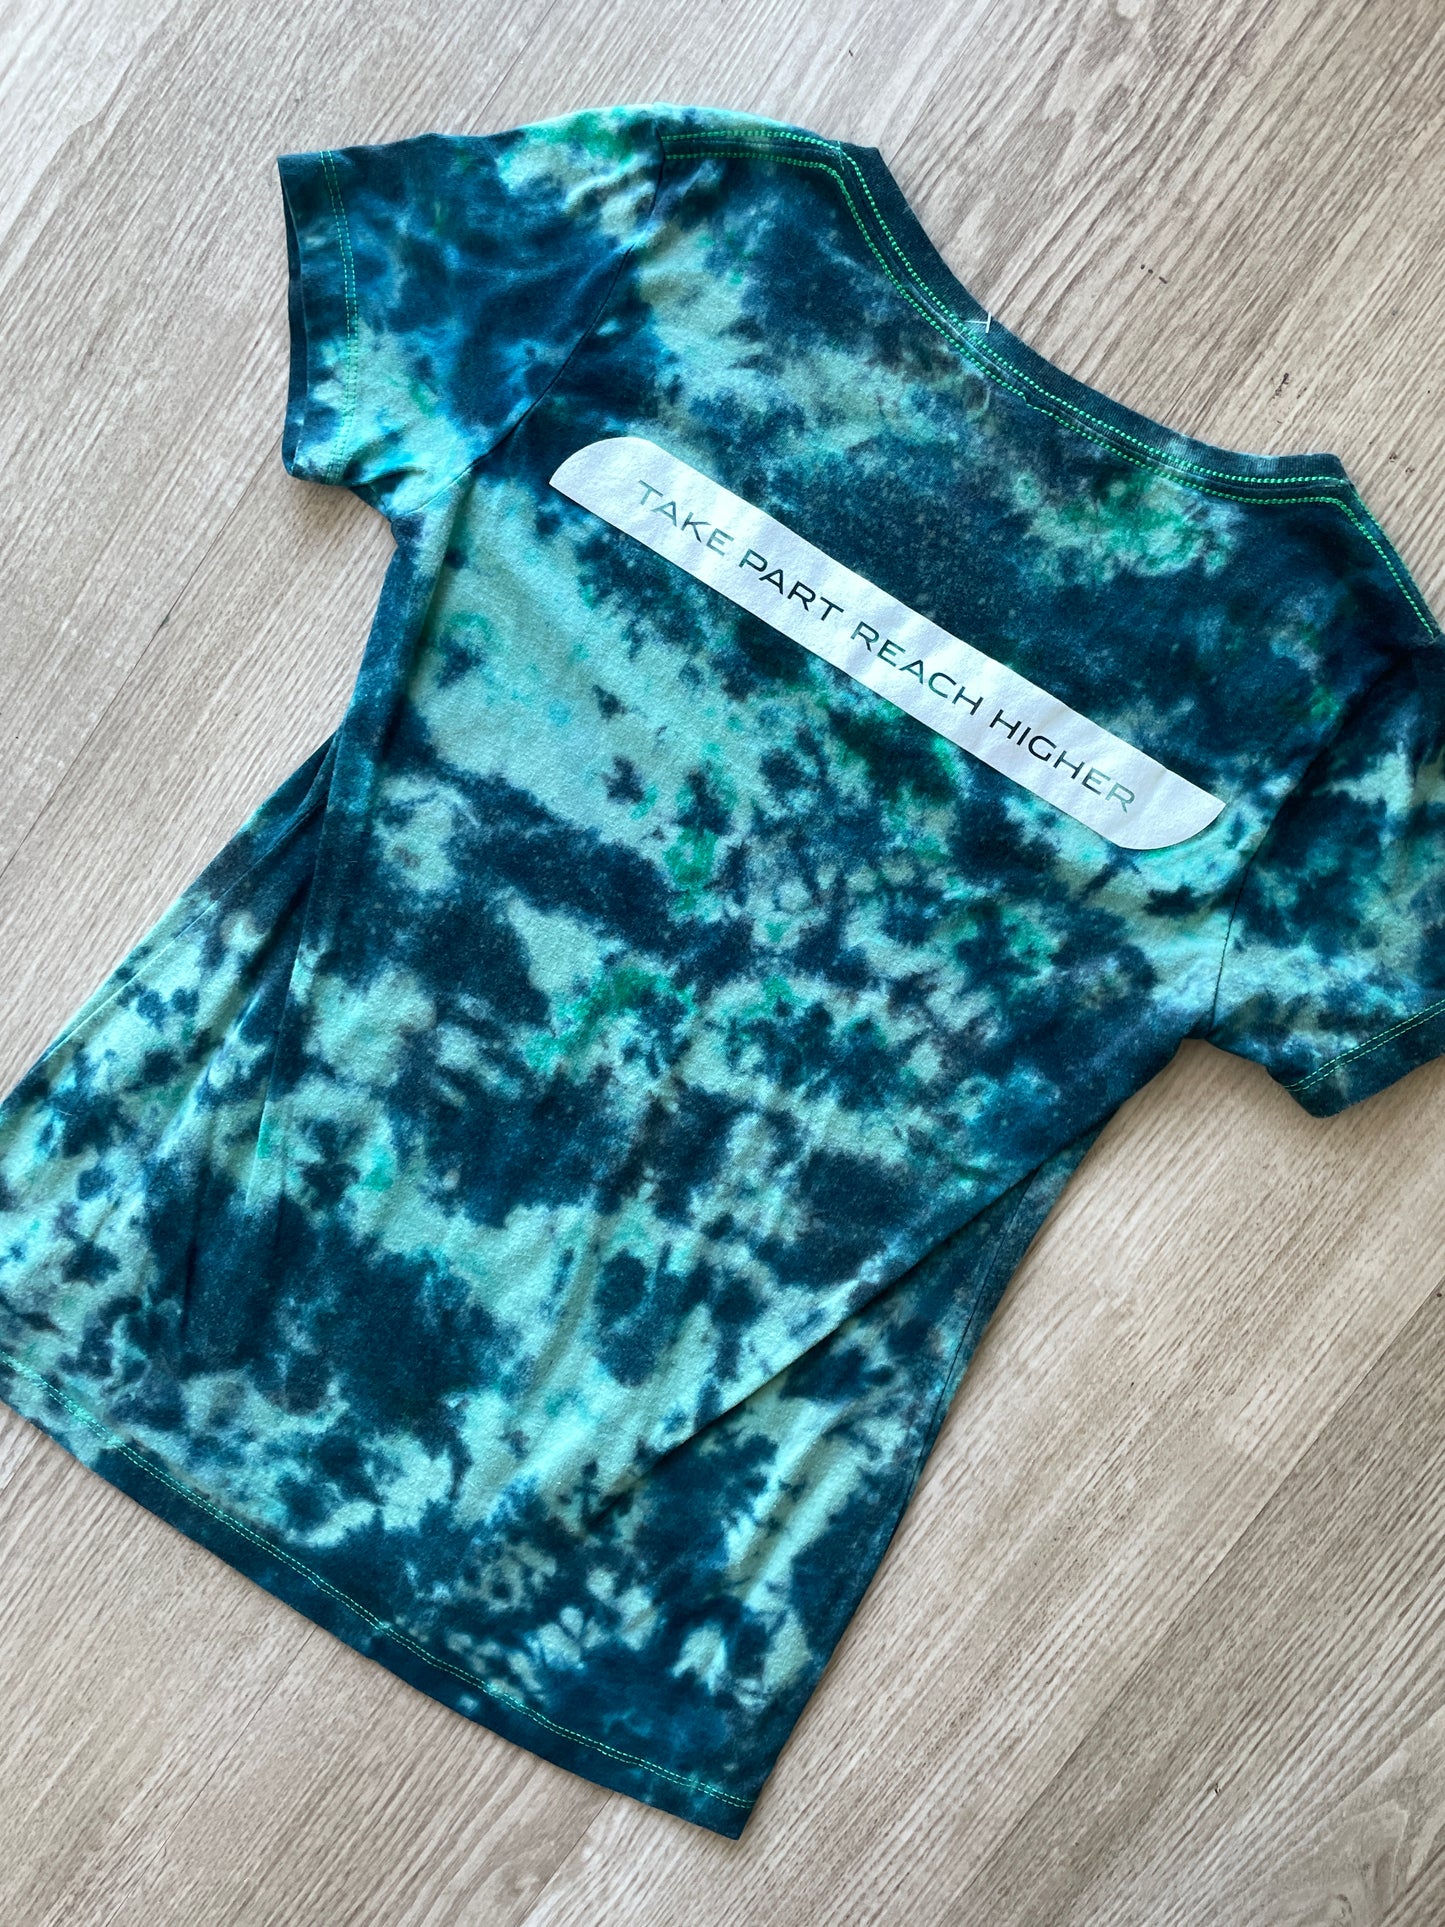 LARGE Women’s Utah Olympic Park Handmade Reverse Tie Dye Short Sleeve T-Shirt | One-Of-a-Kind Upcycled Green and Gray Crumpled Top